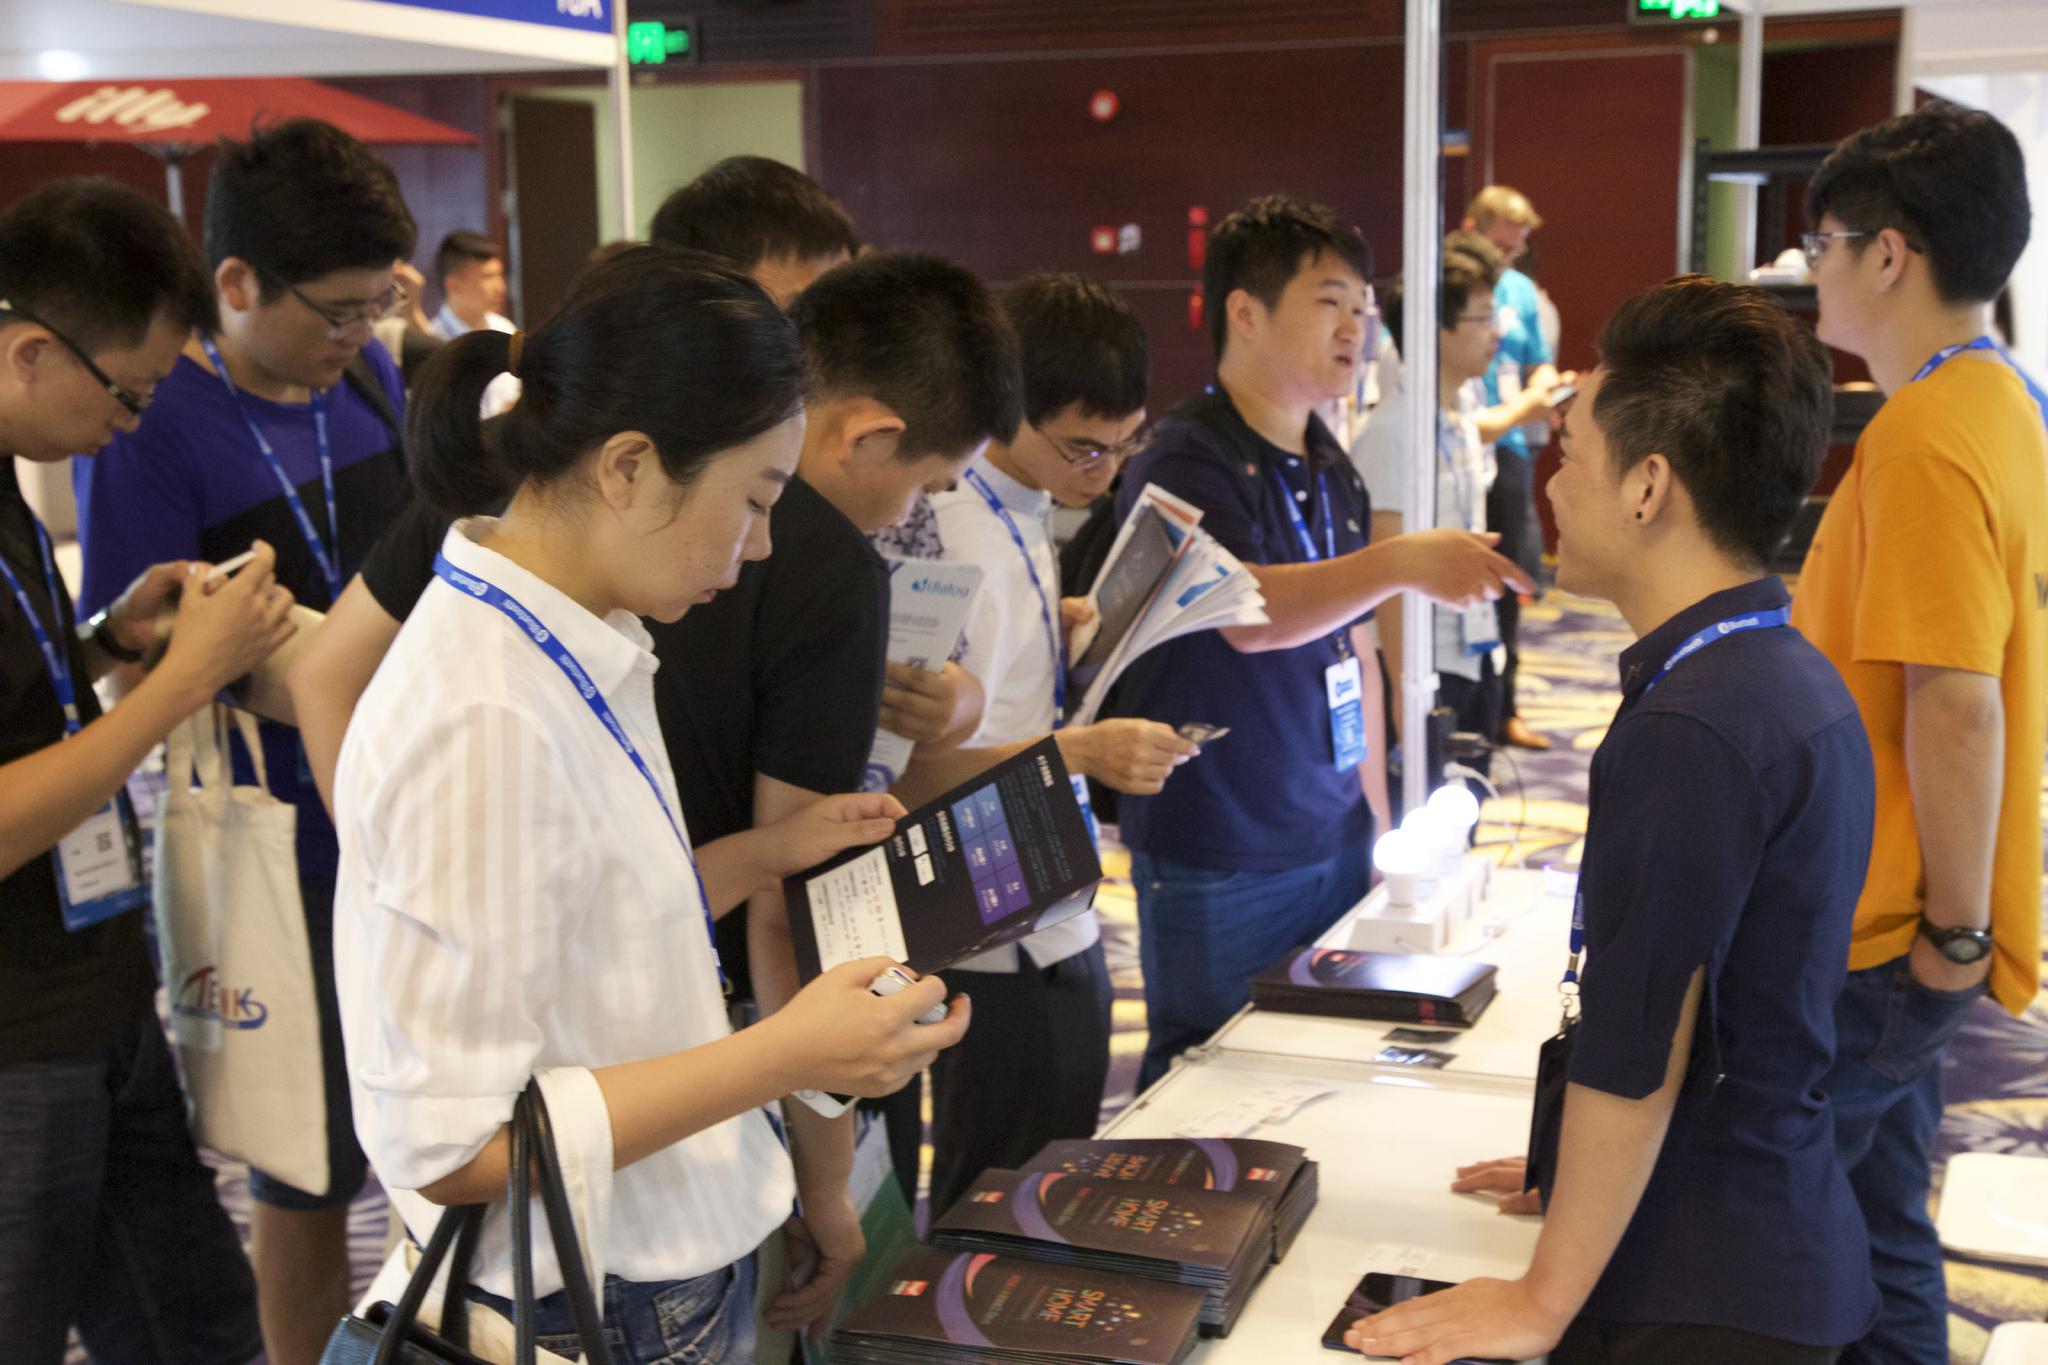 Bluetooth Asia 2019 is hot on